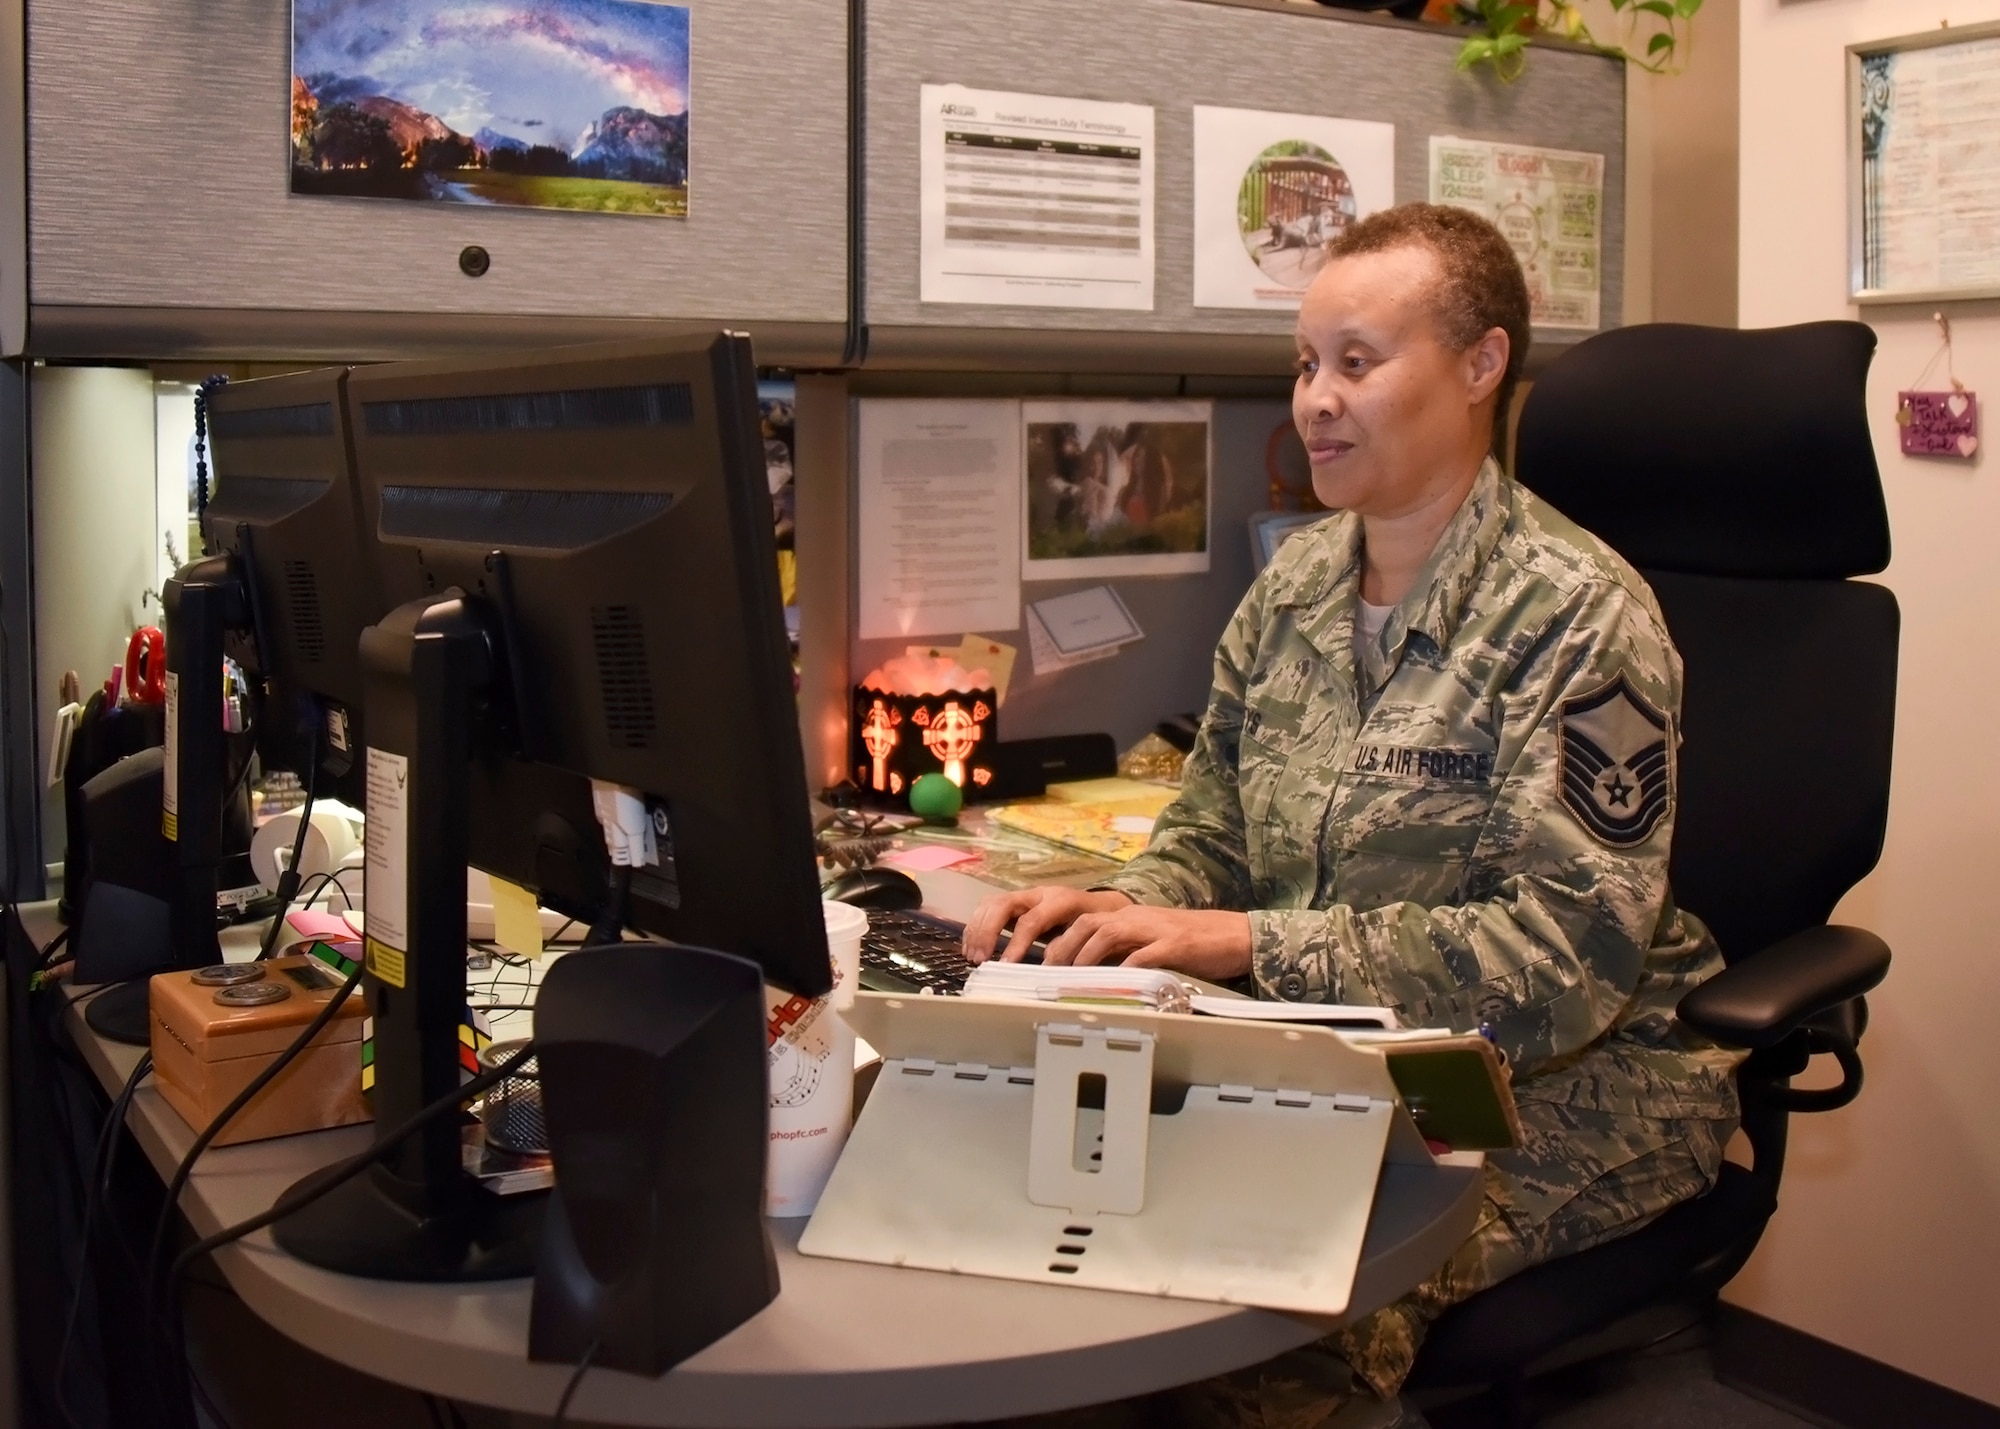 MSgt. Angela Keys is at her desk completing required reports Oct. 20, 2016 at Warfield Air National Guard Base, Middle River, Md. Keys is currently the base services manager. (U.S. Air National Guard photo by Airman 1st Class Enjoli Saunders/RELEASED)